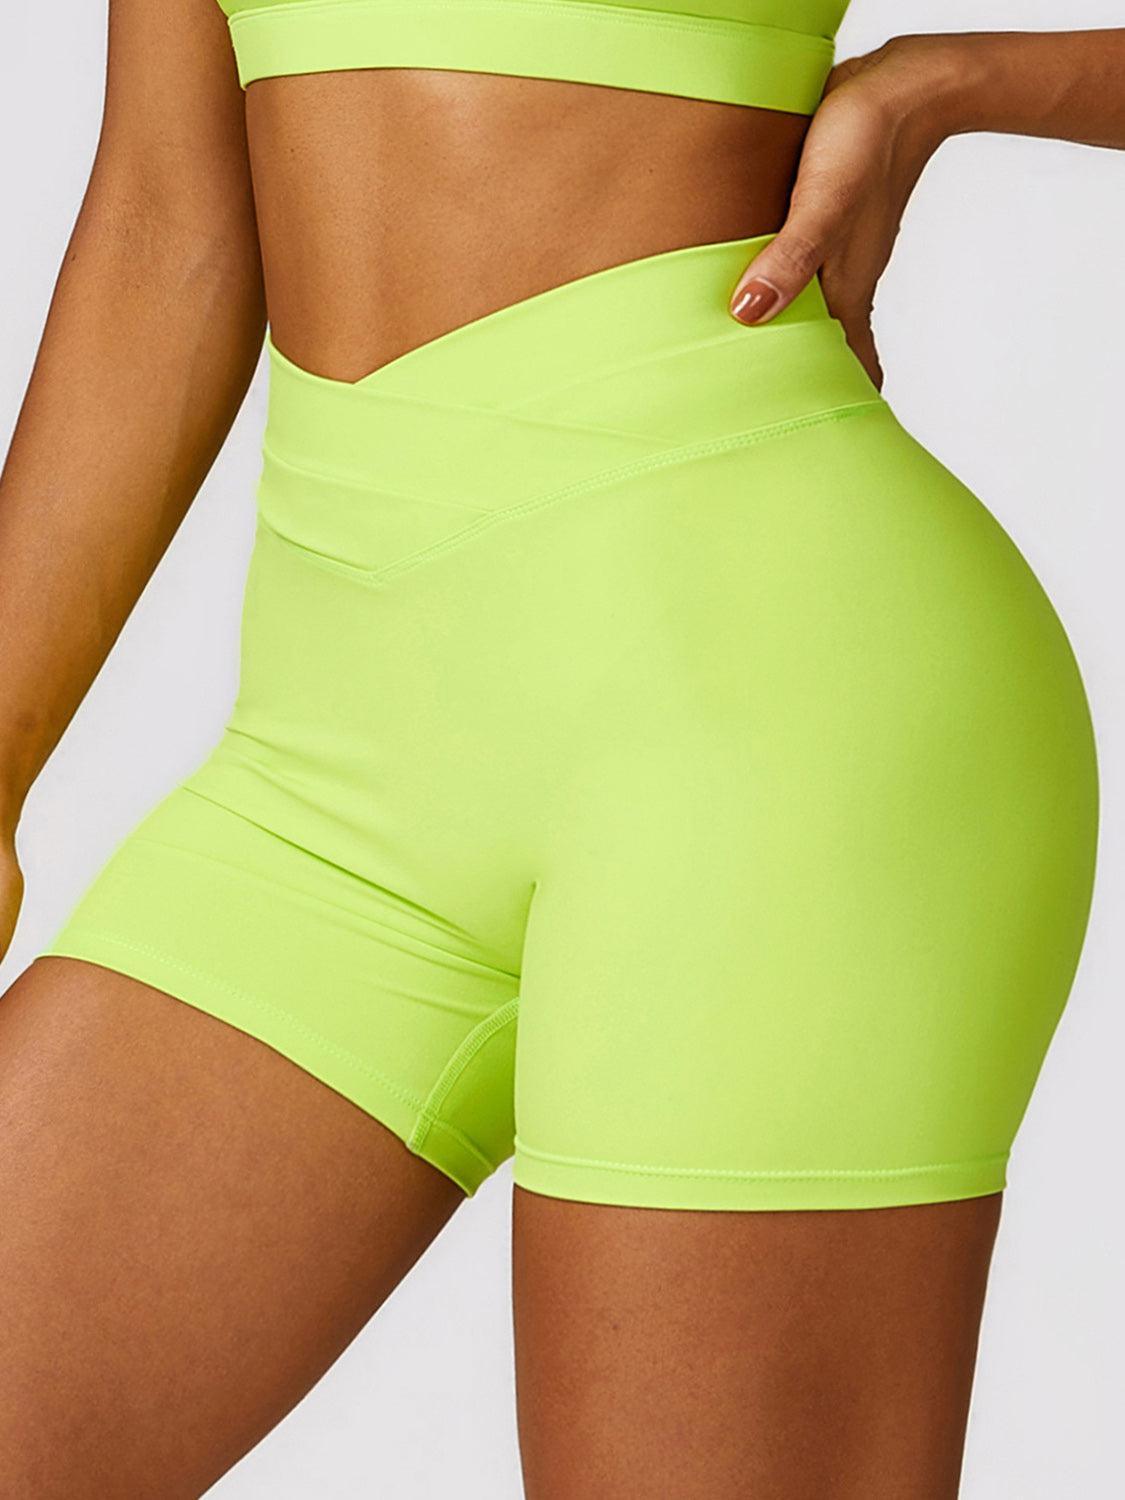 a woman in neon green shorts and a bra top